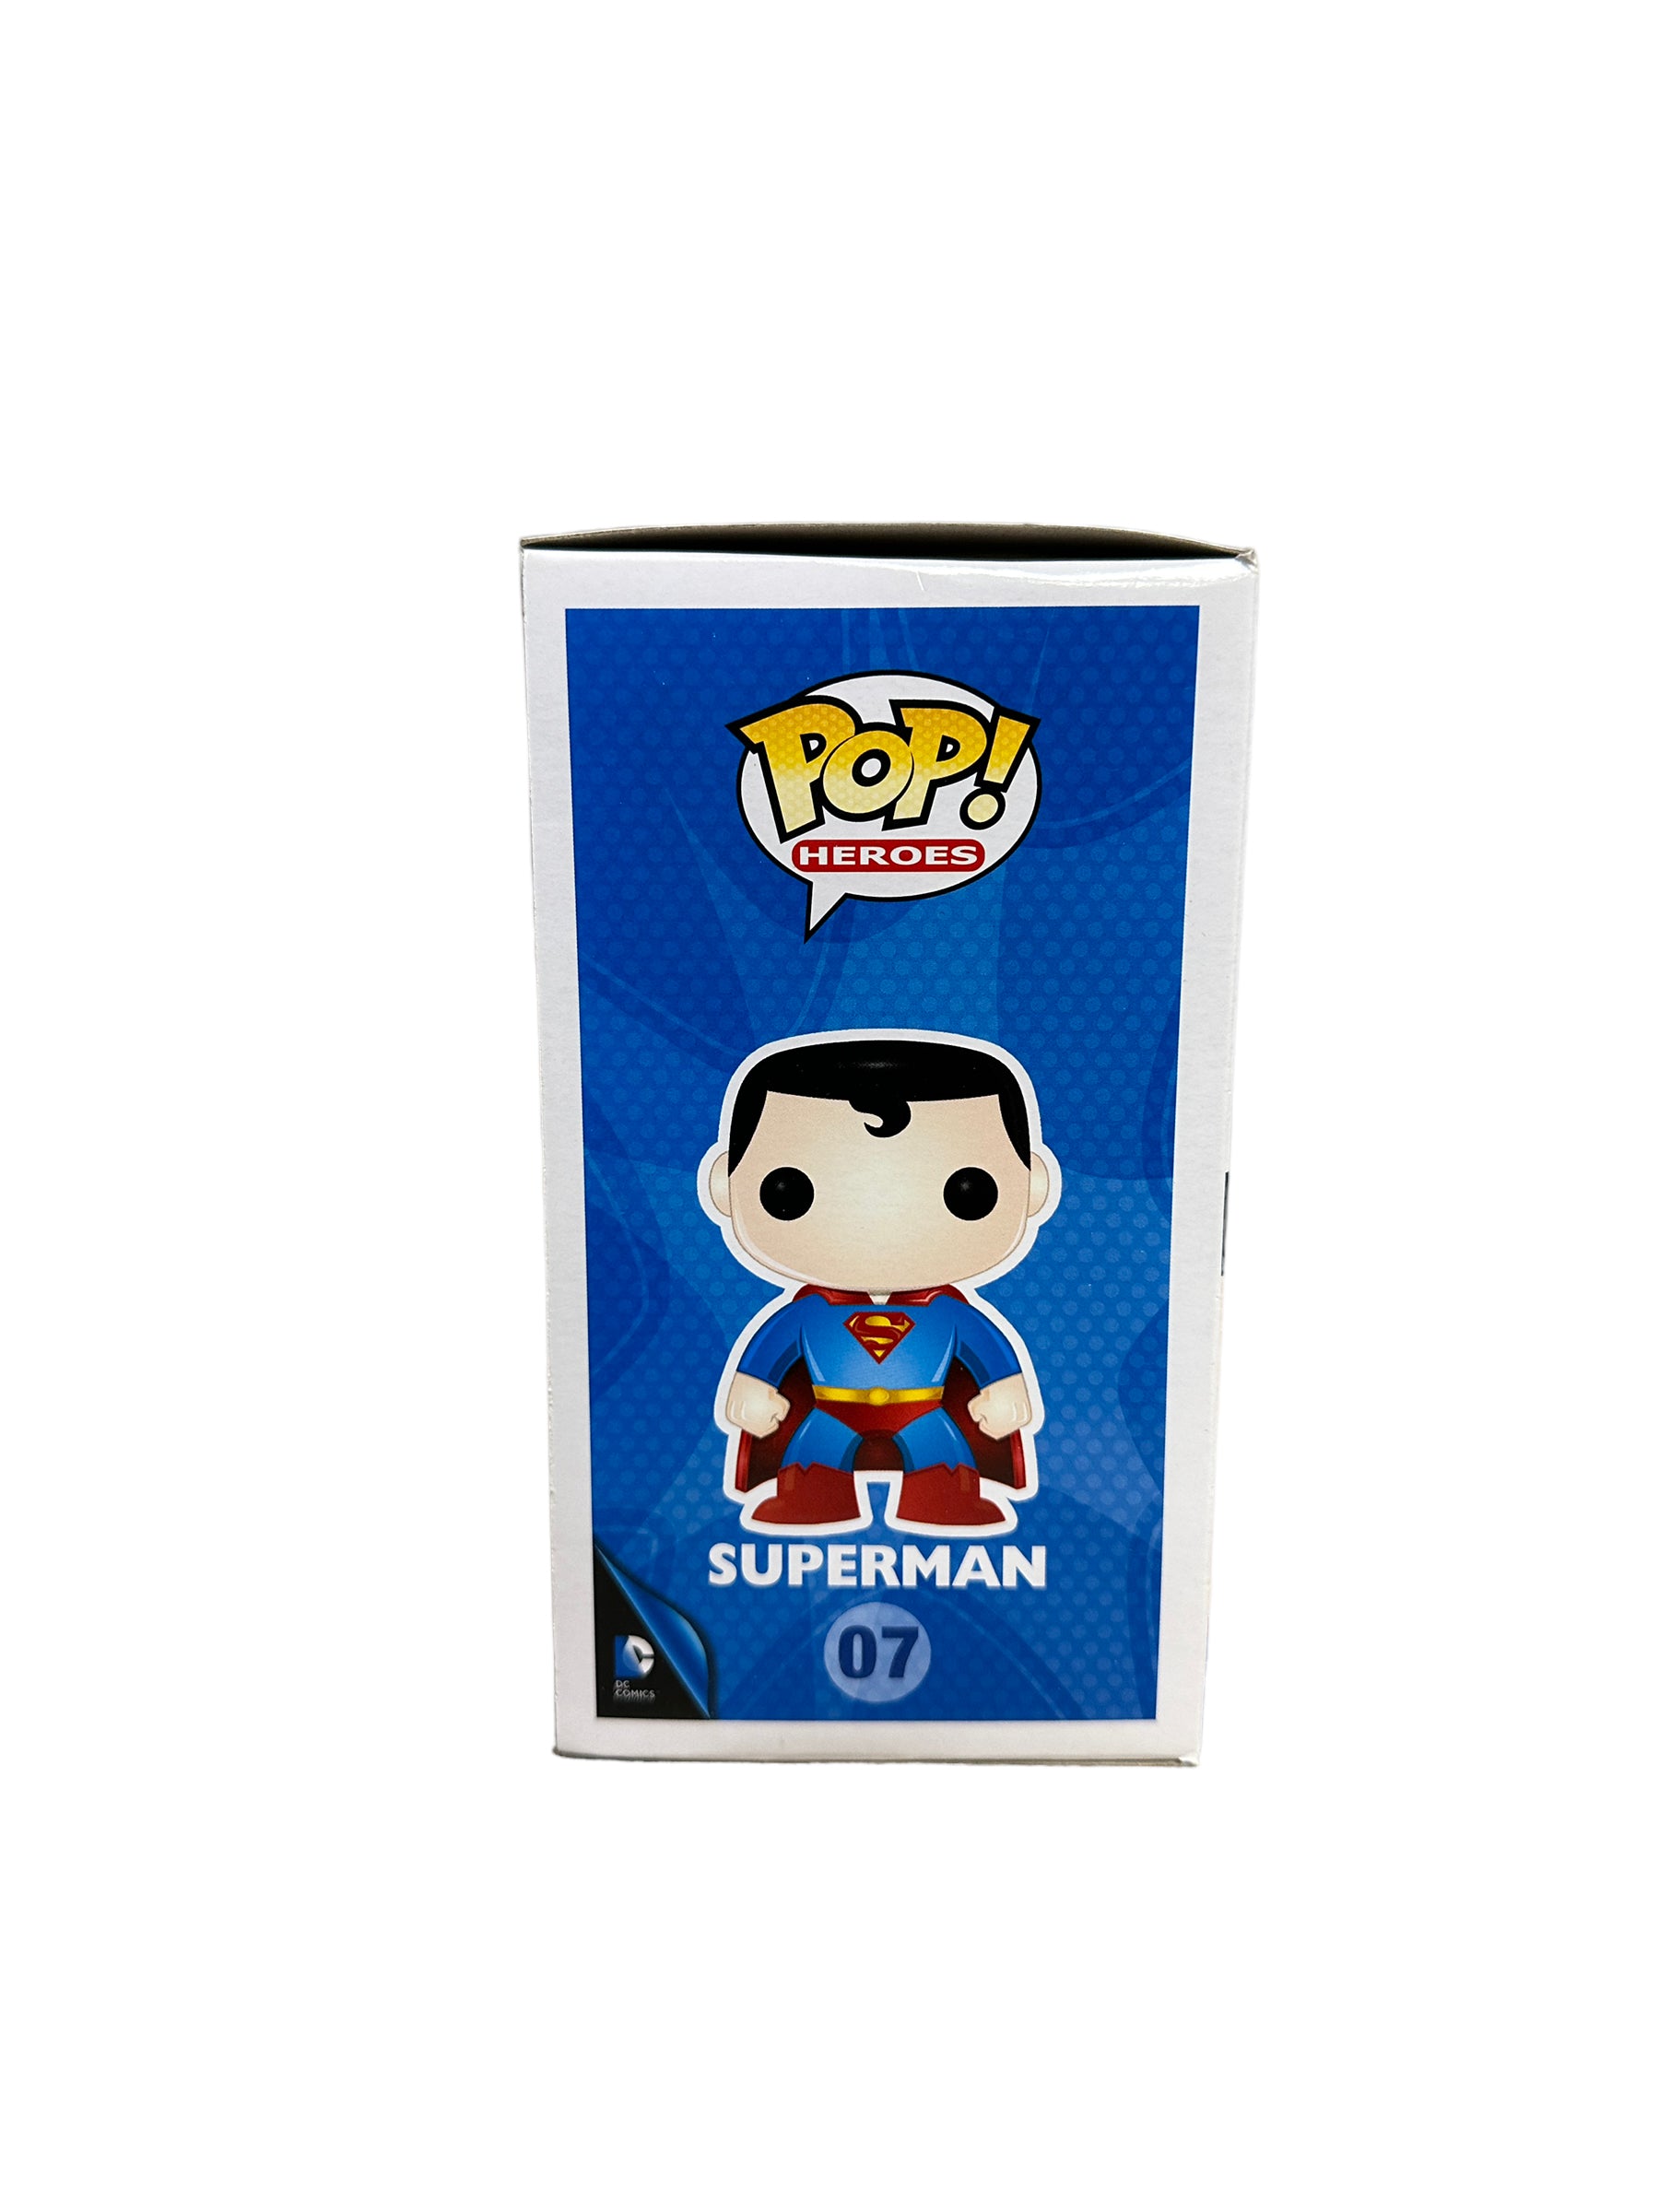 Superman #07 (Silver) Funko Pop! - DC Super Heroes - Hot Topic Employees  Exclusive LE144 Pcs - Condition 6.5/10